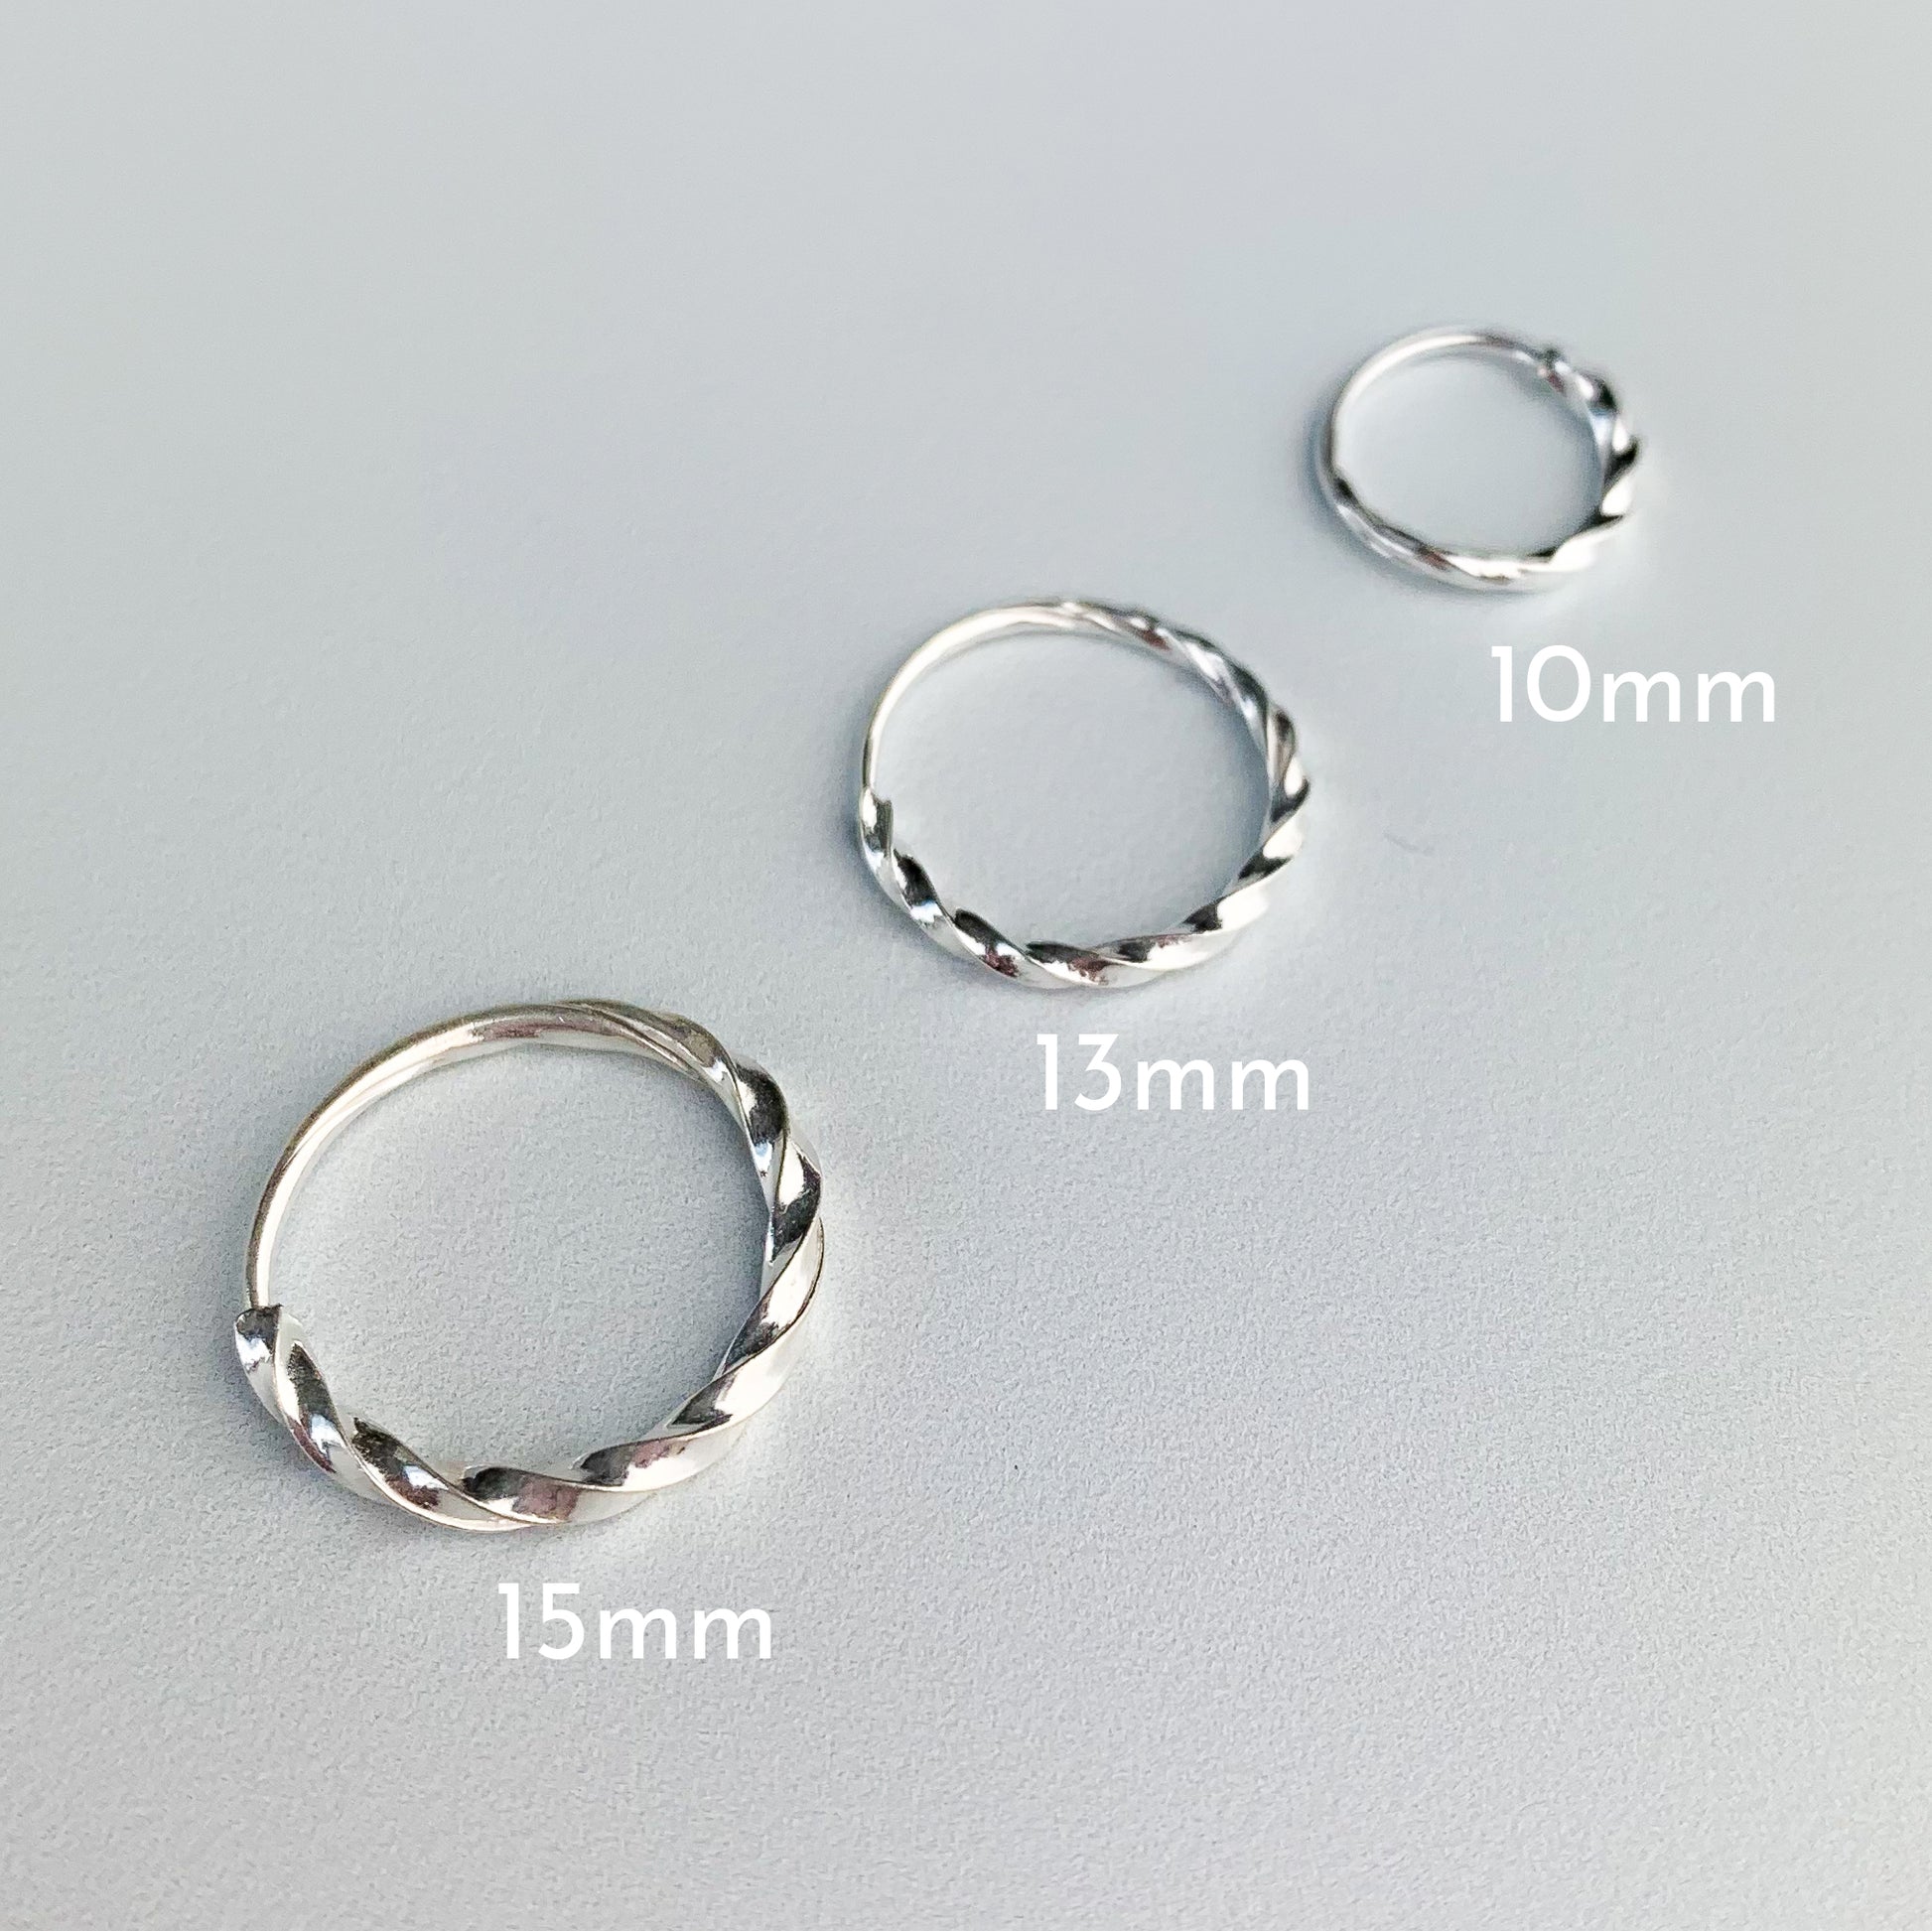 Twisted silver hoop earrings with a sleeper fastening, in three sizes. The diameters are 15mm, 13mm, and 10mm